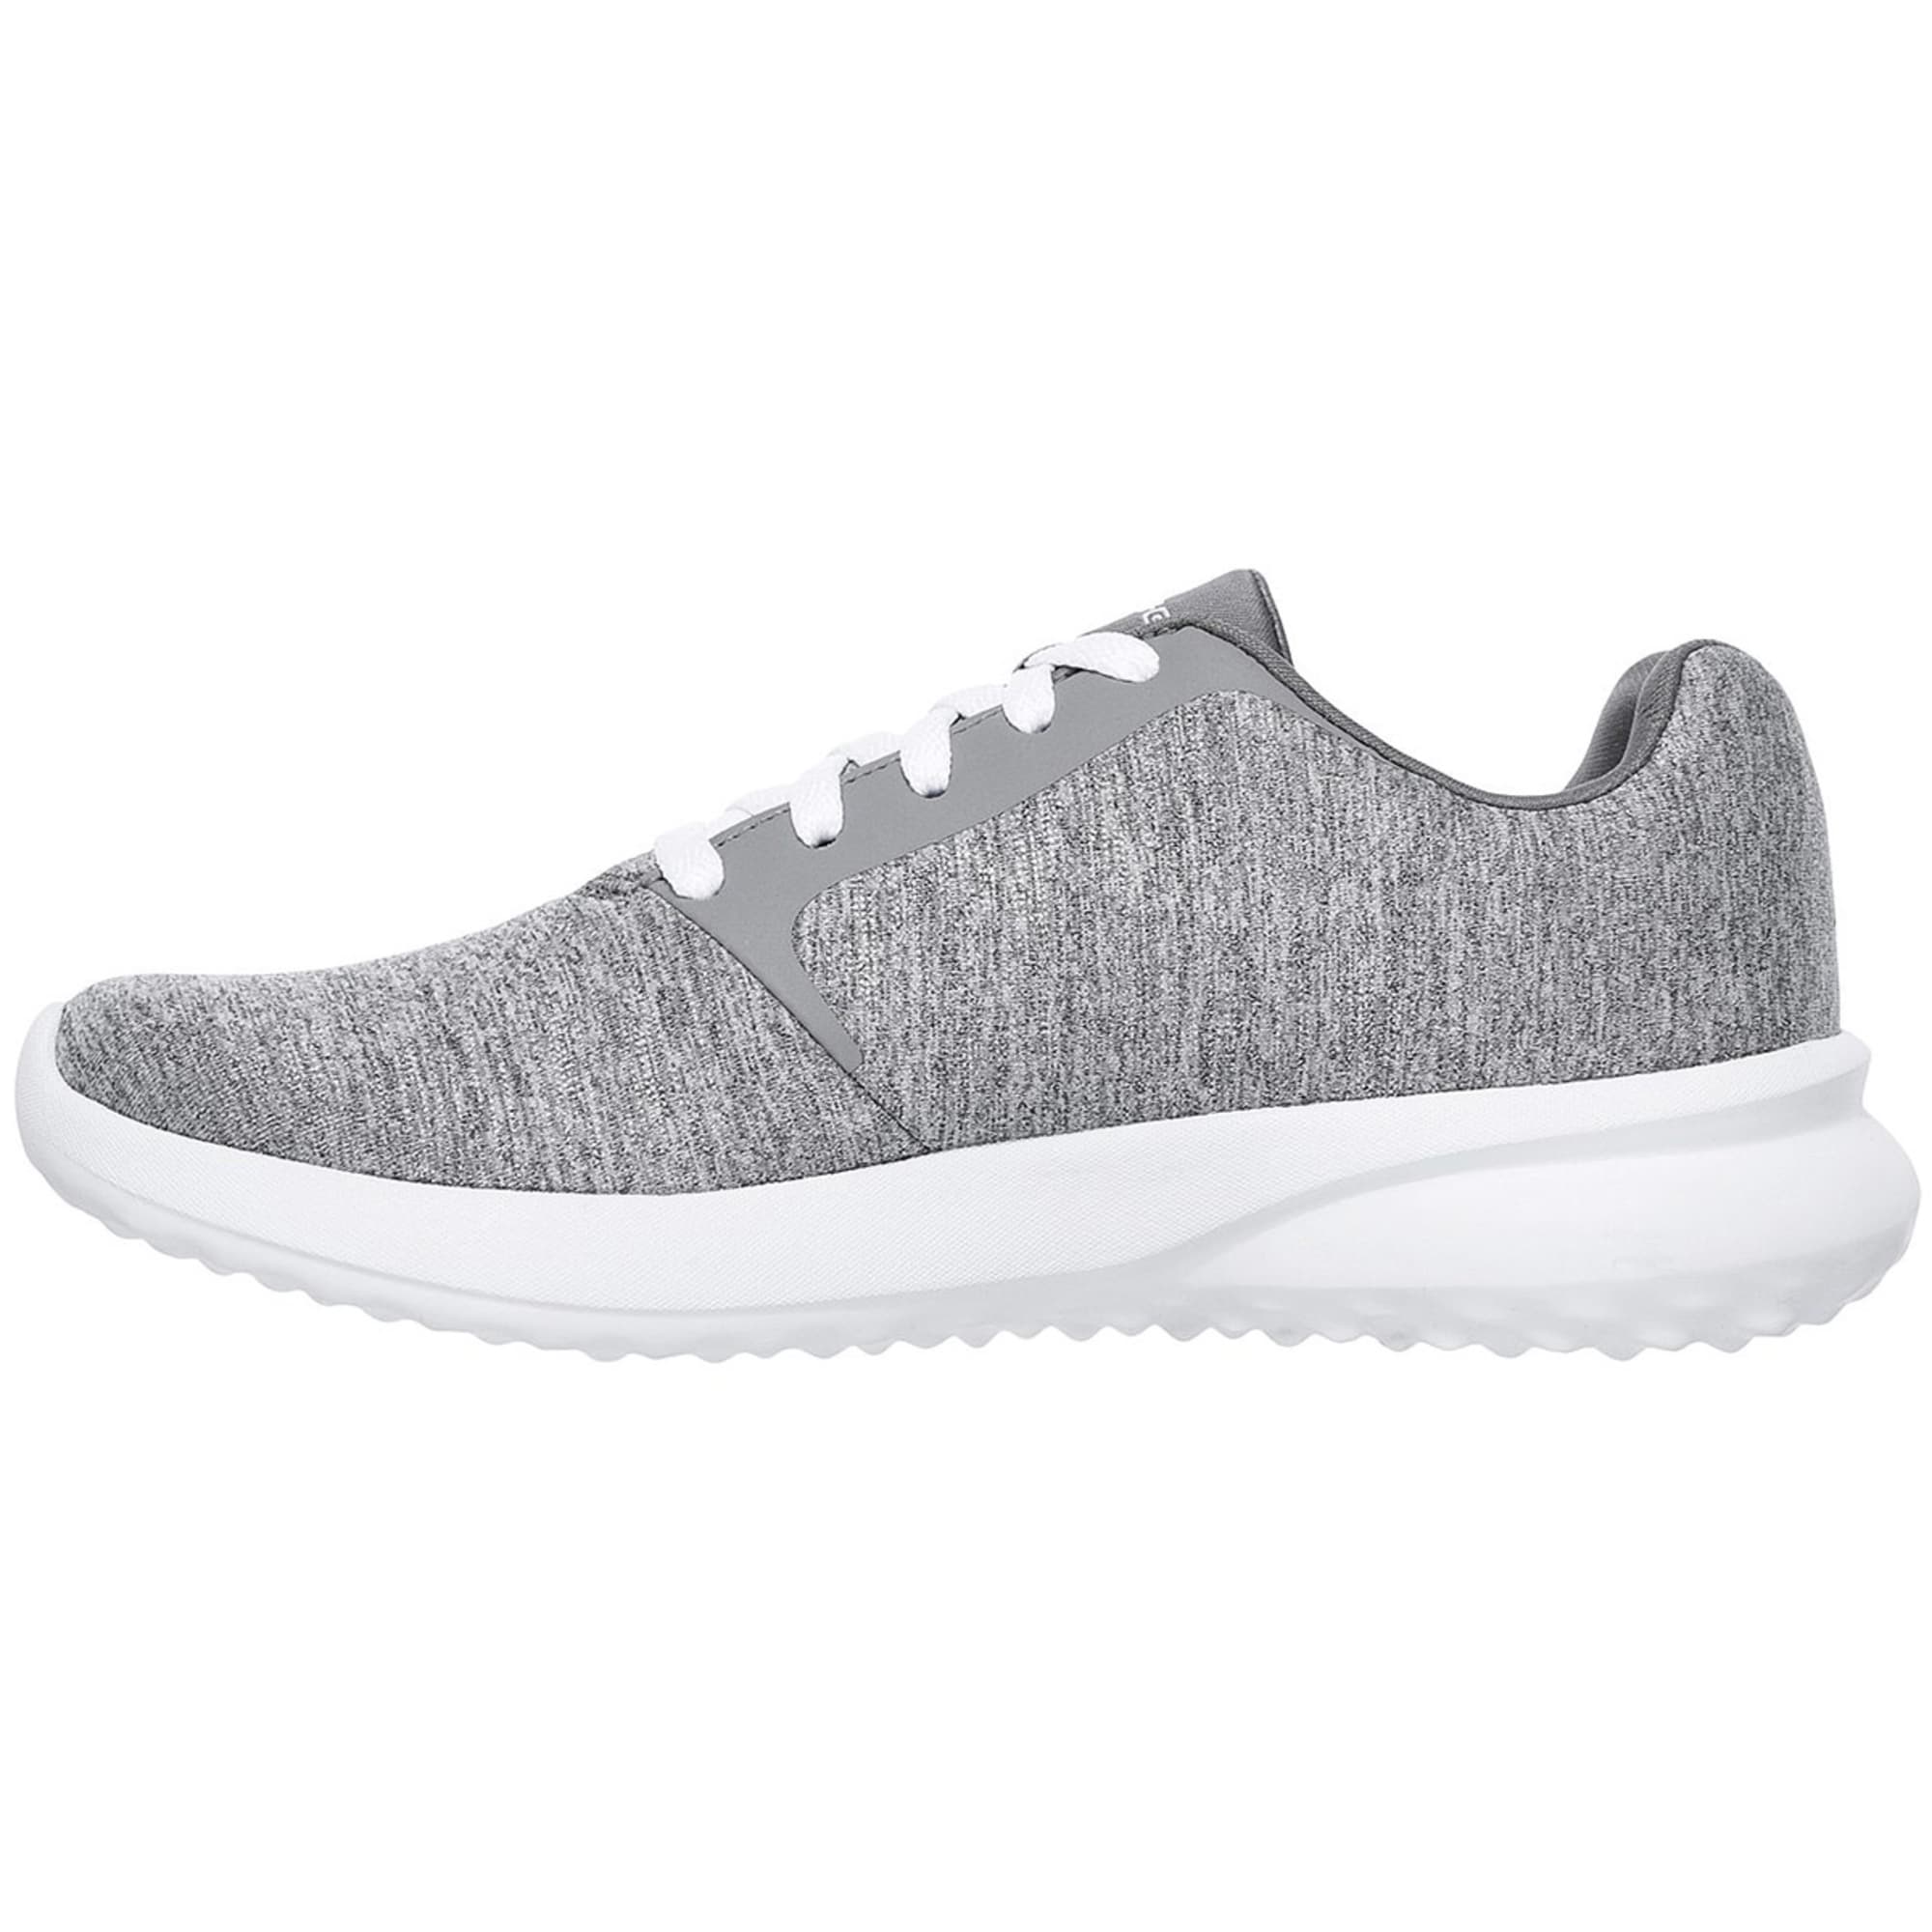 Skygge afbryde pustes op SKECHERS Women's On The Go City 3 - Renovated Sneakers, Heather Gray -  Bob's Stores